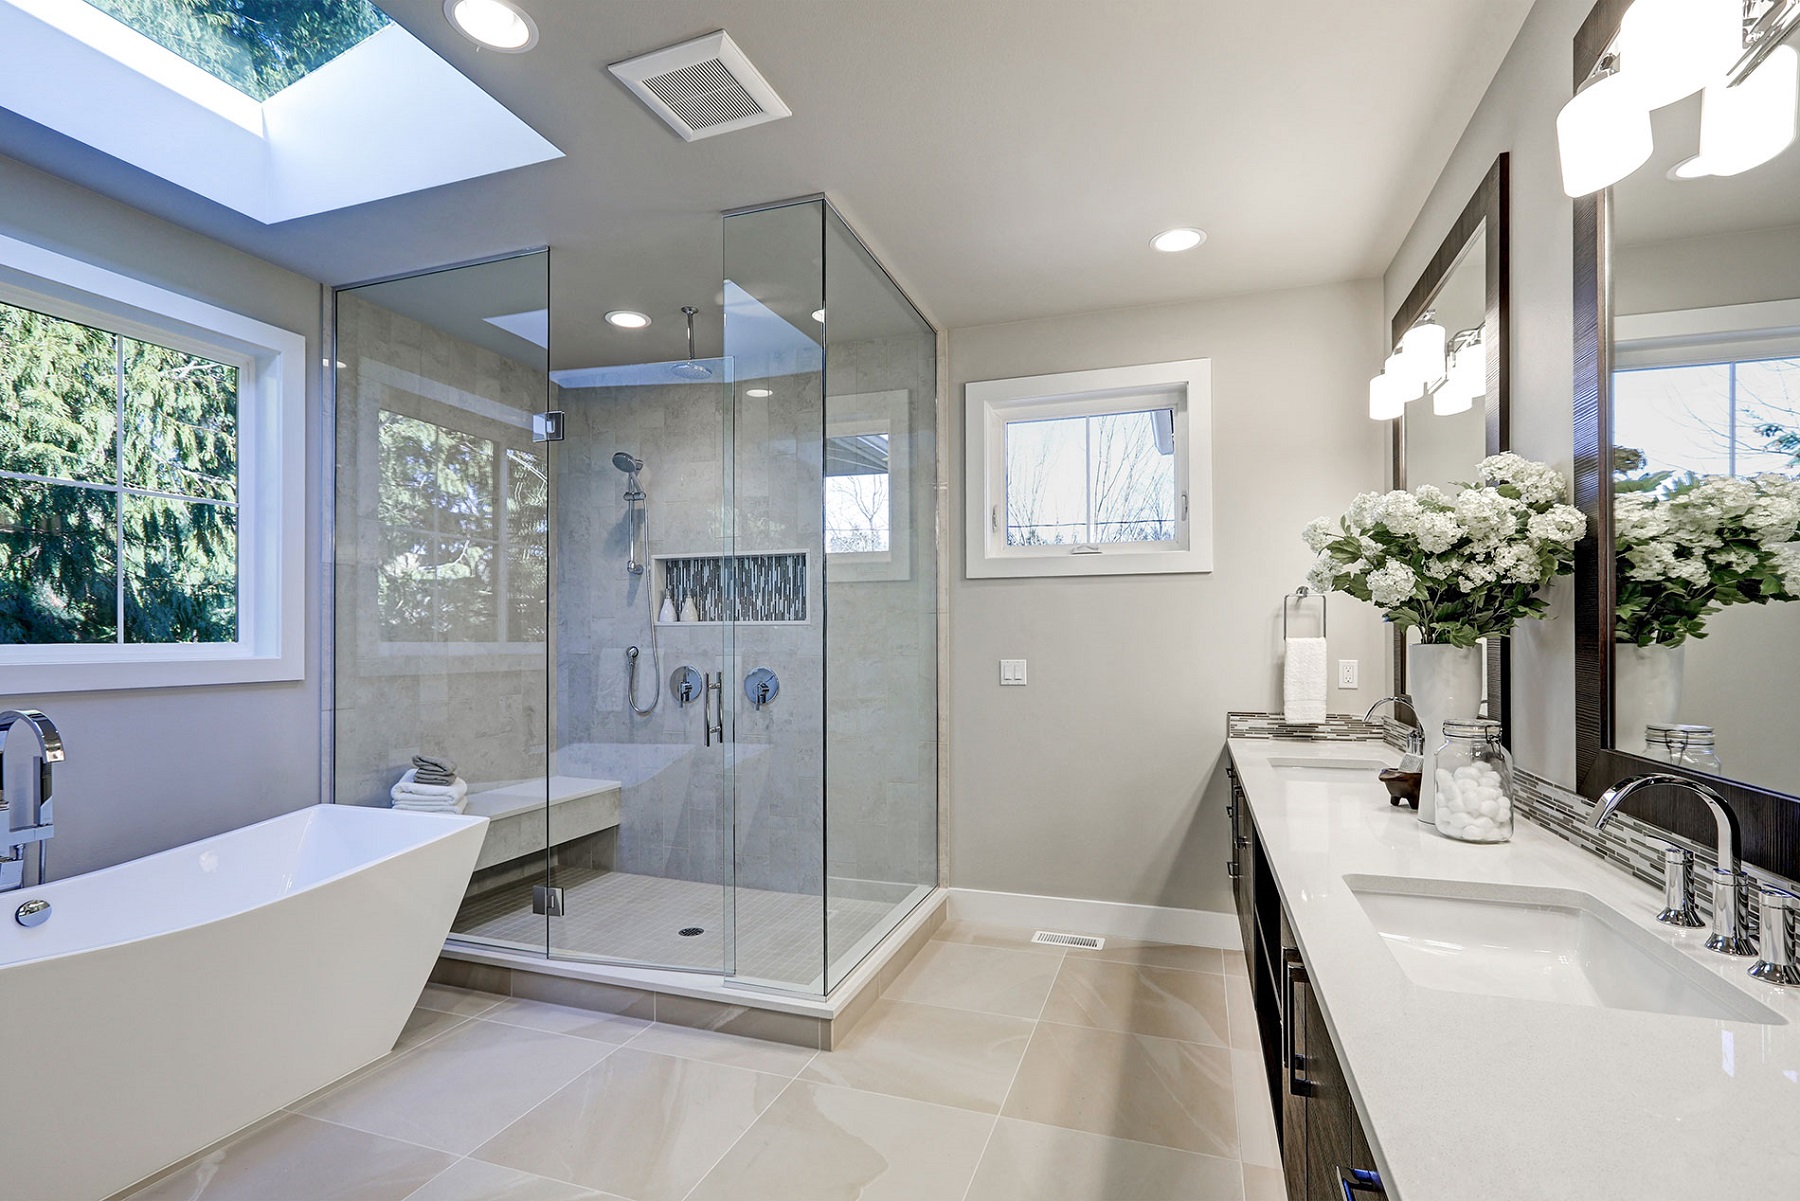 How Much Does A Shower Remodel Cost, Average Cost Of Remodeling A Bathroom